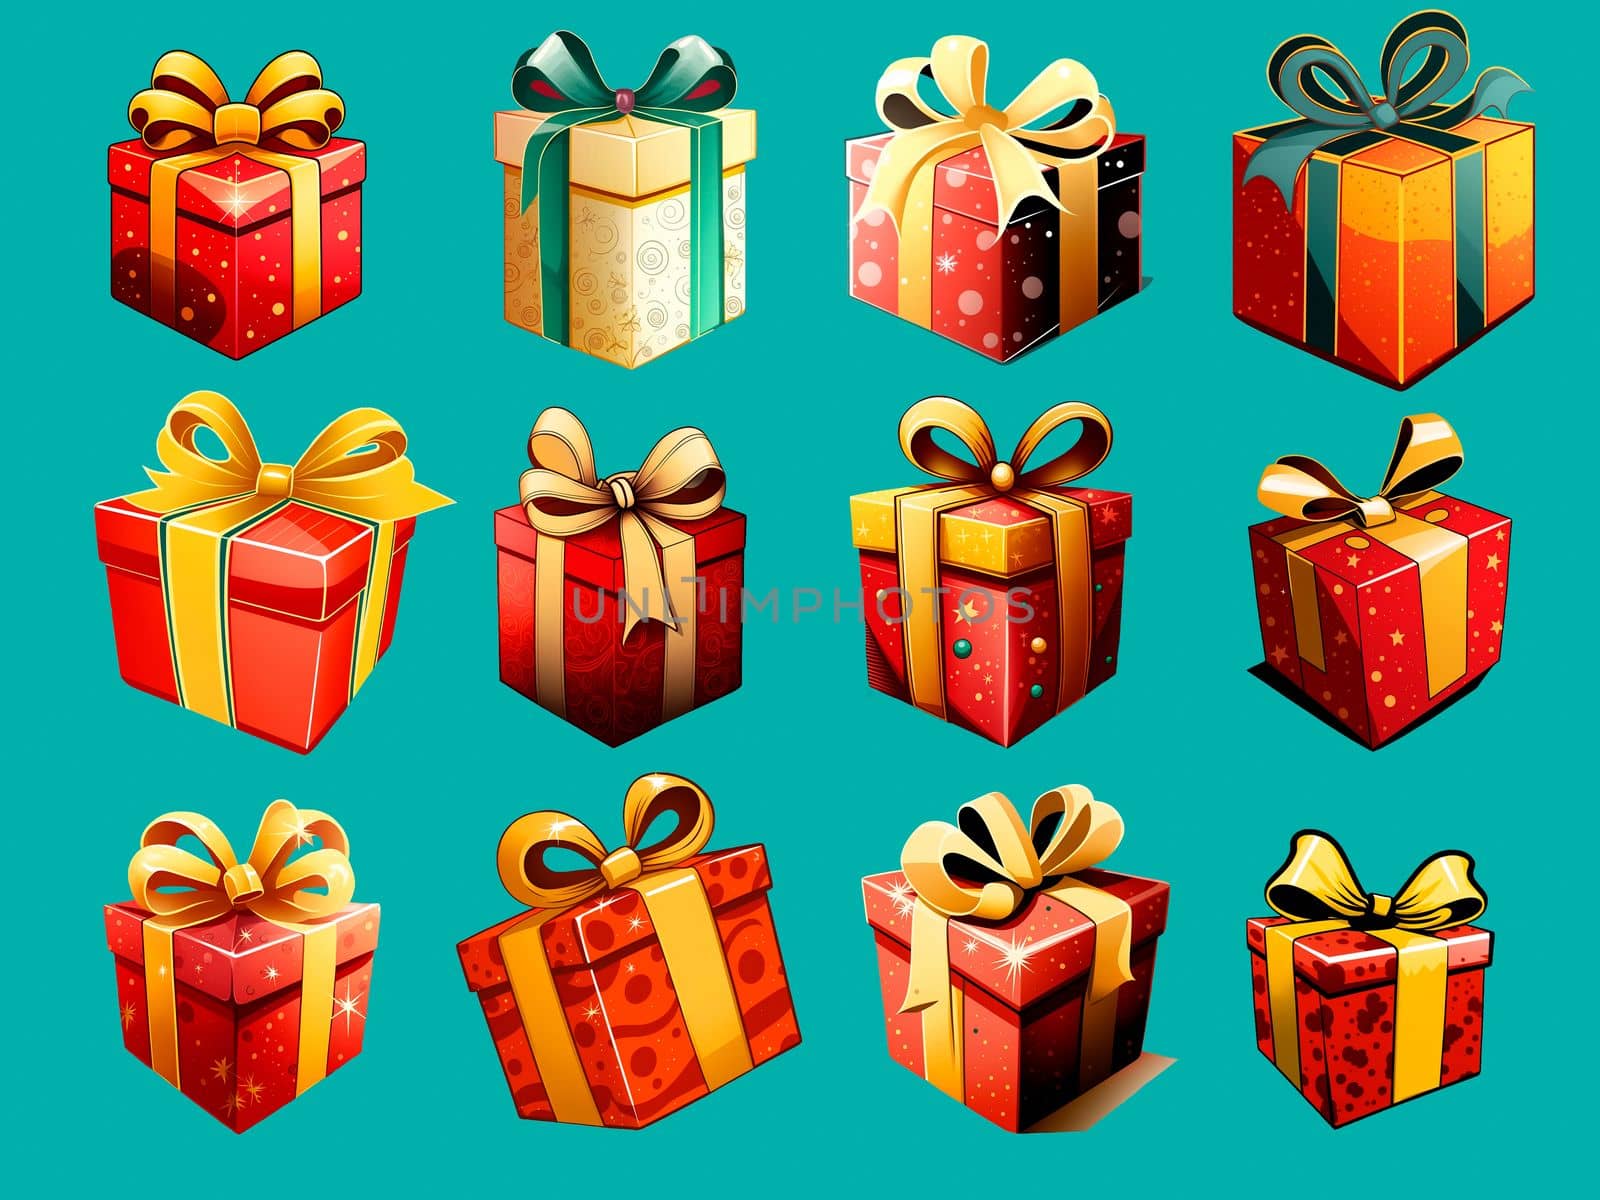 A colorful set of icons with Christmas gifts in the style of pop art